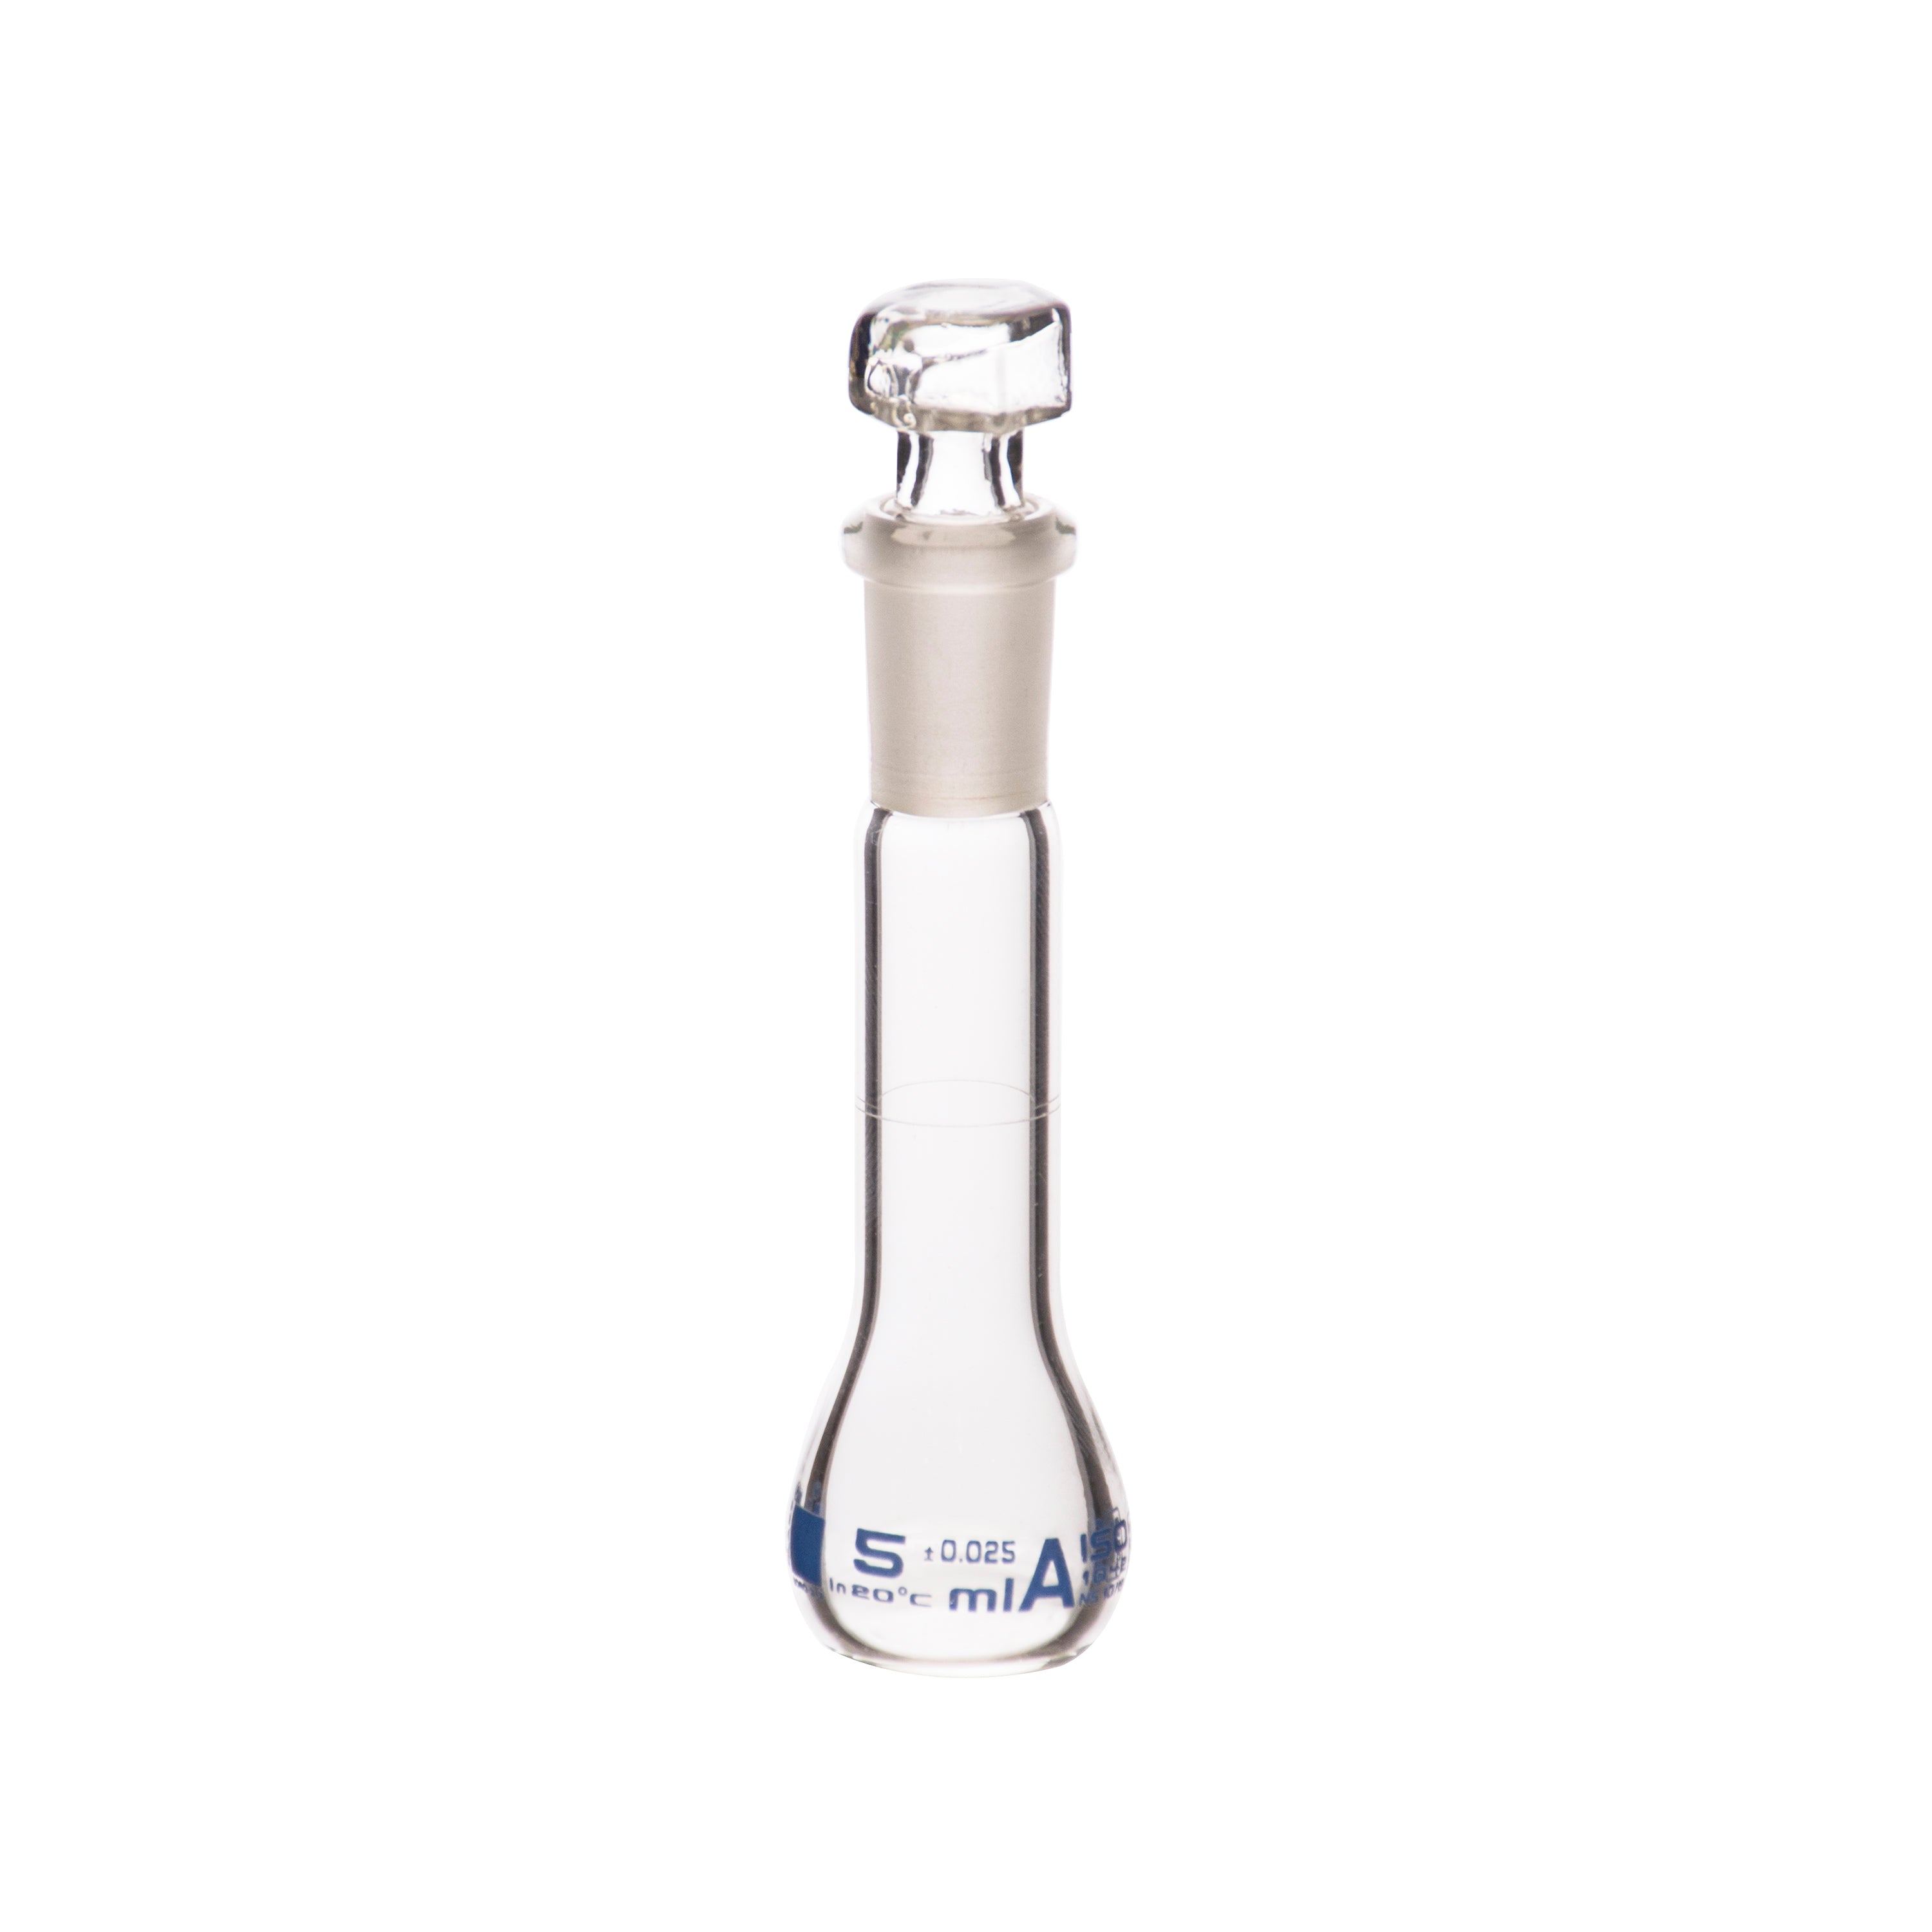 Borosilicate Volumetric Flask with Hollow Glass Stopper, 5ml, Class A, Blue Print, Autoclavable